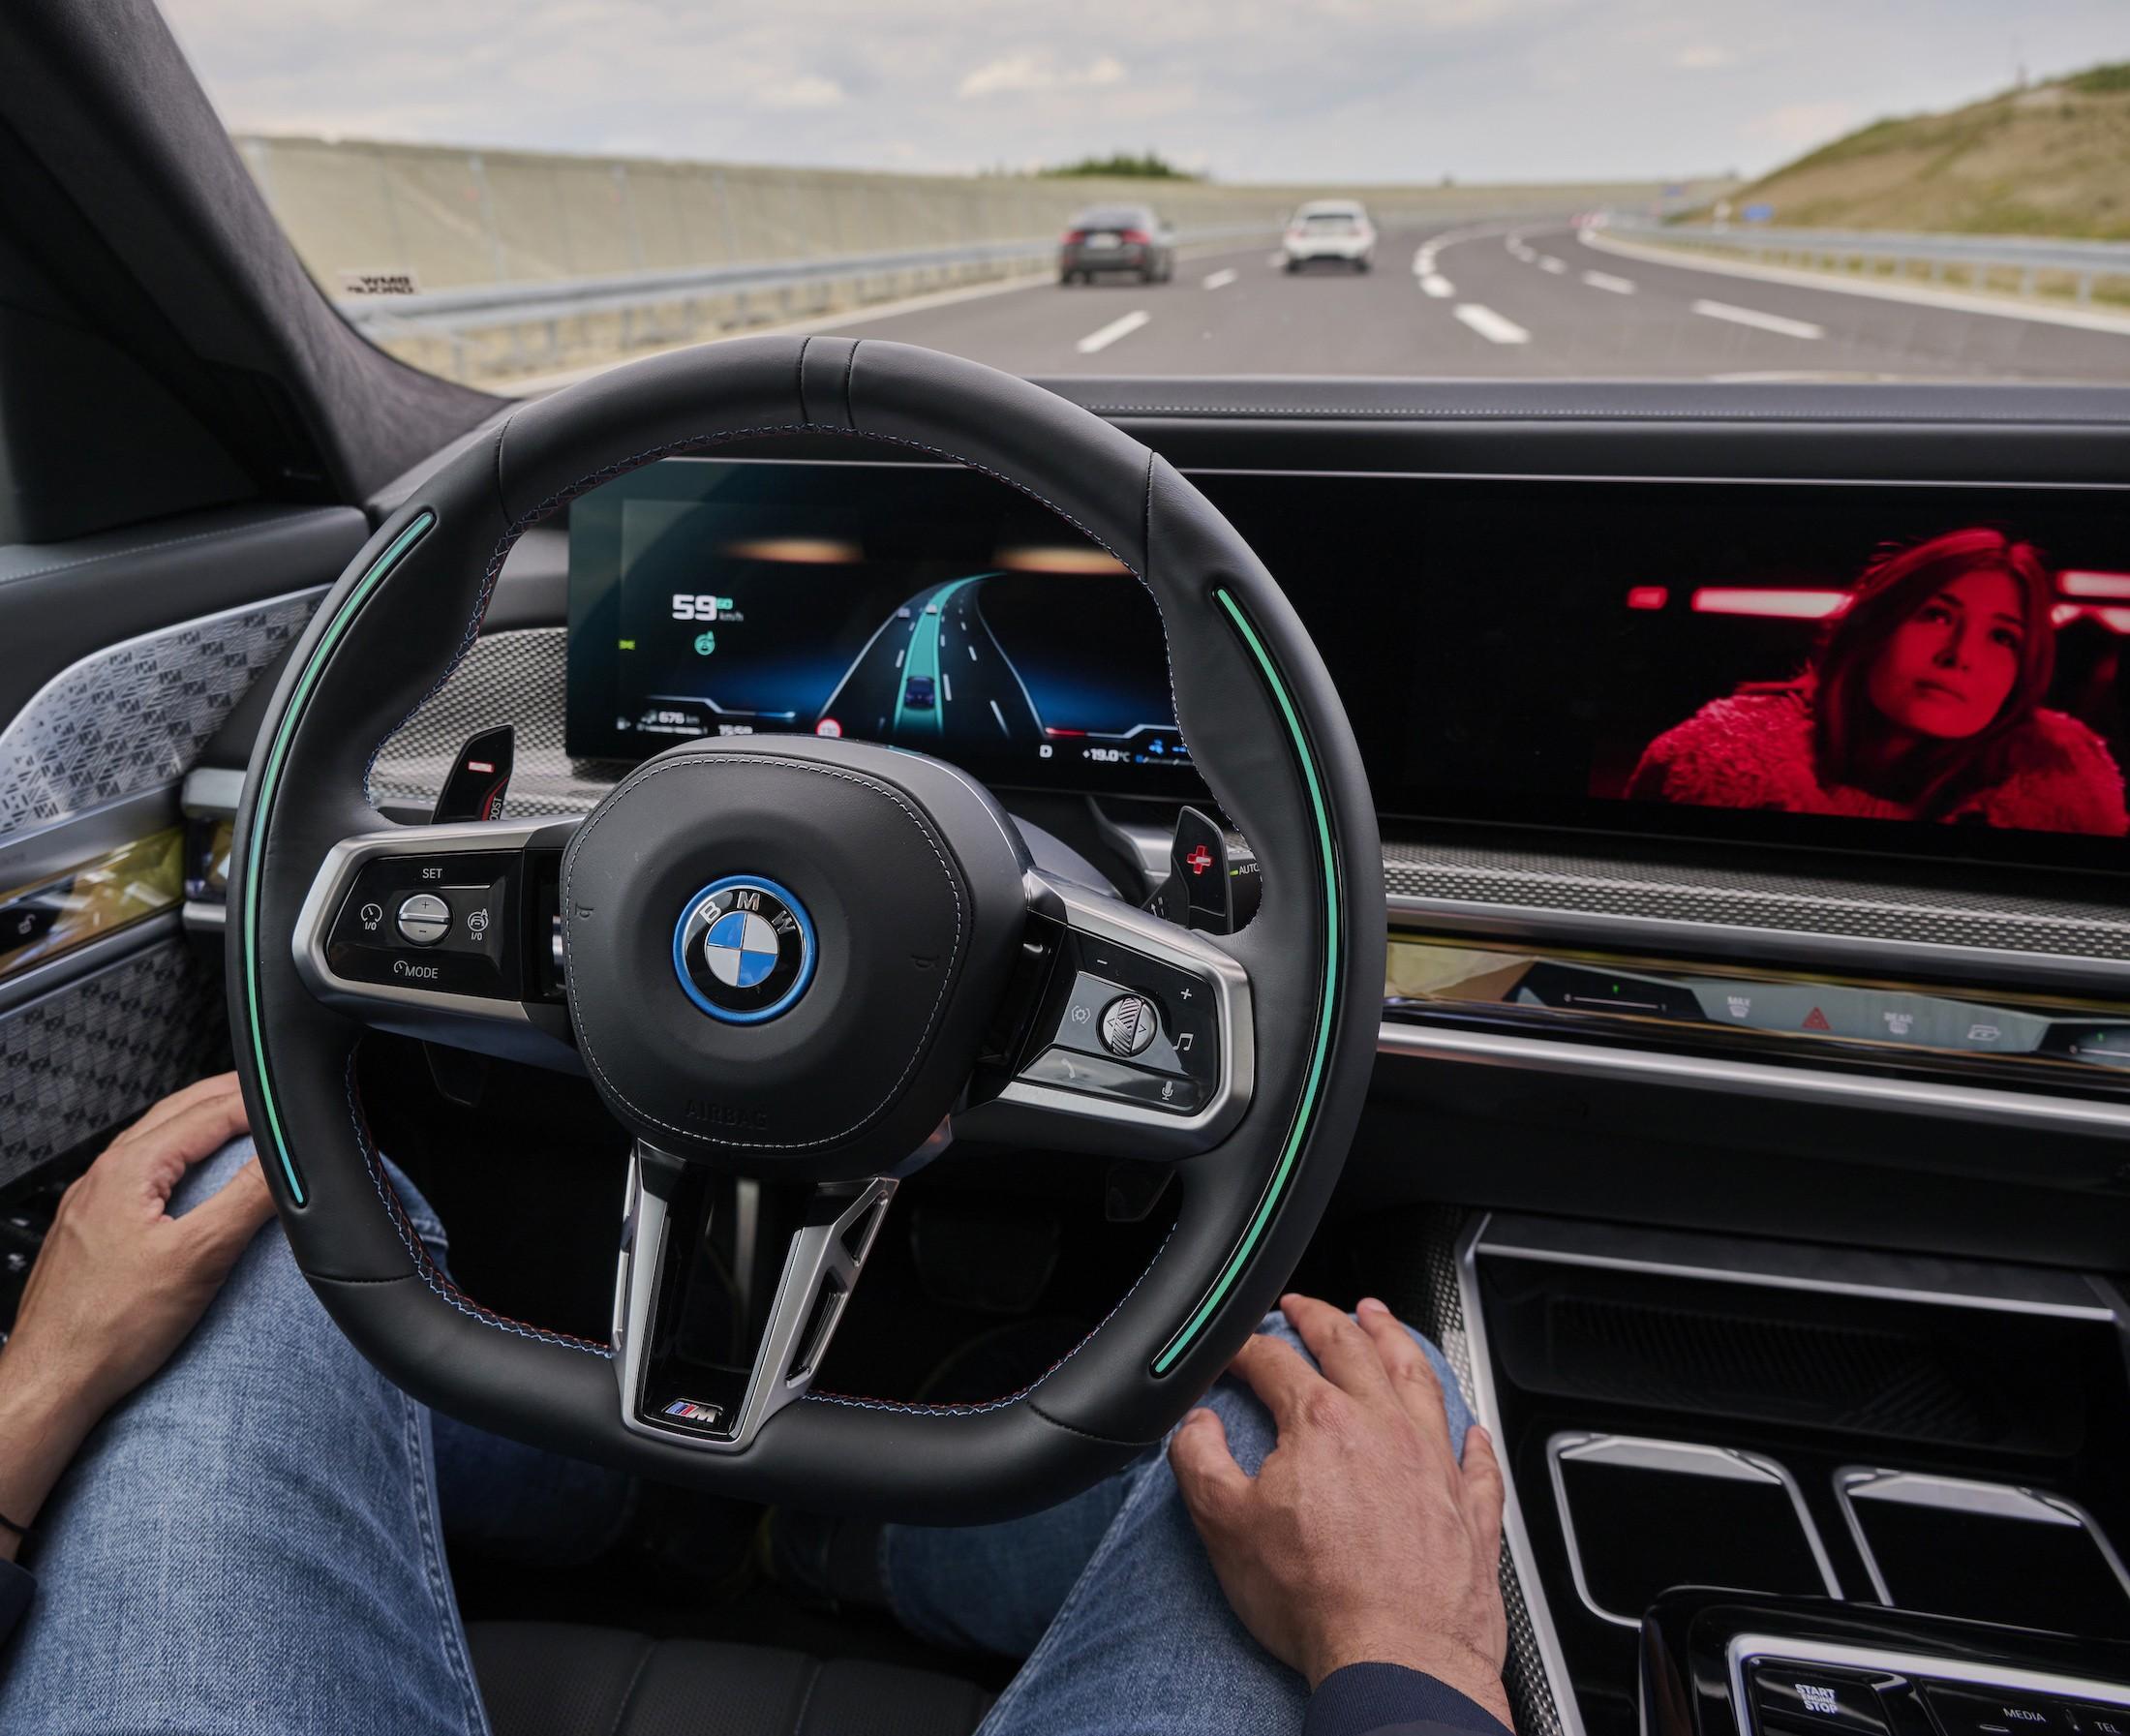 bmw 7 series gets the level 3 automated driving will be able to drive itself in the dark 6